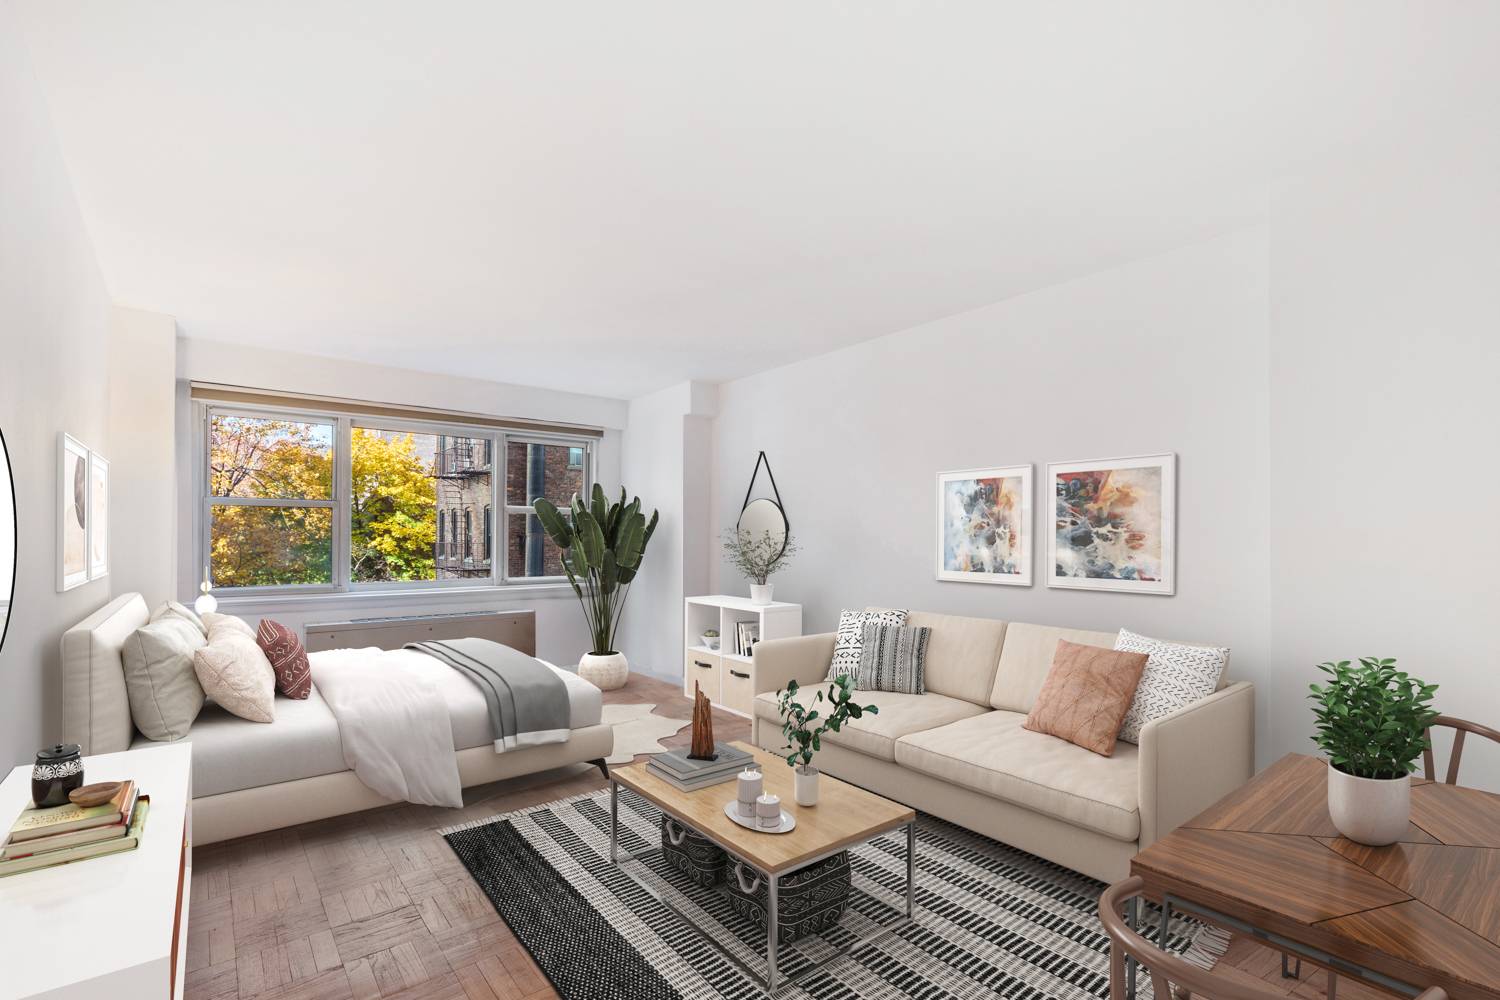 Downtown delight located on one of the prettiest tree lined blocks of West 12th Street !